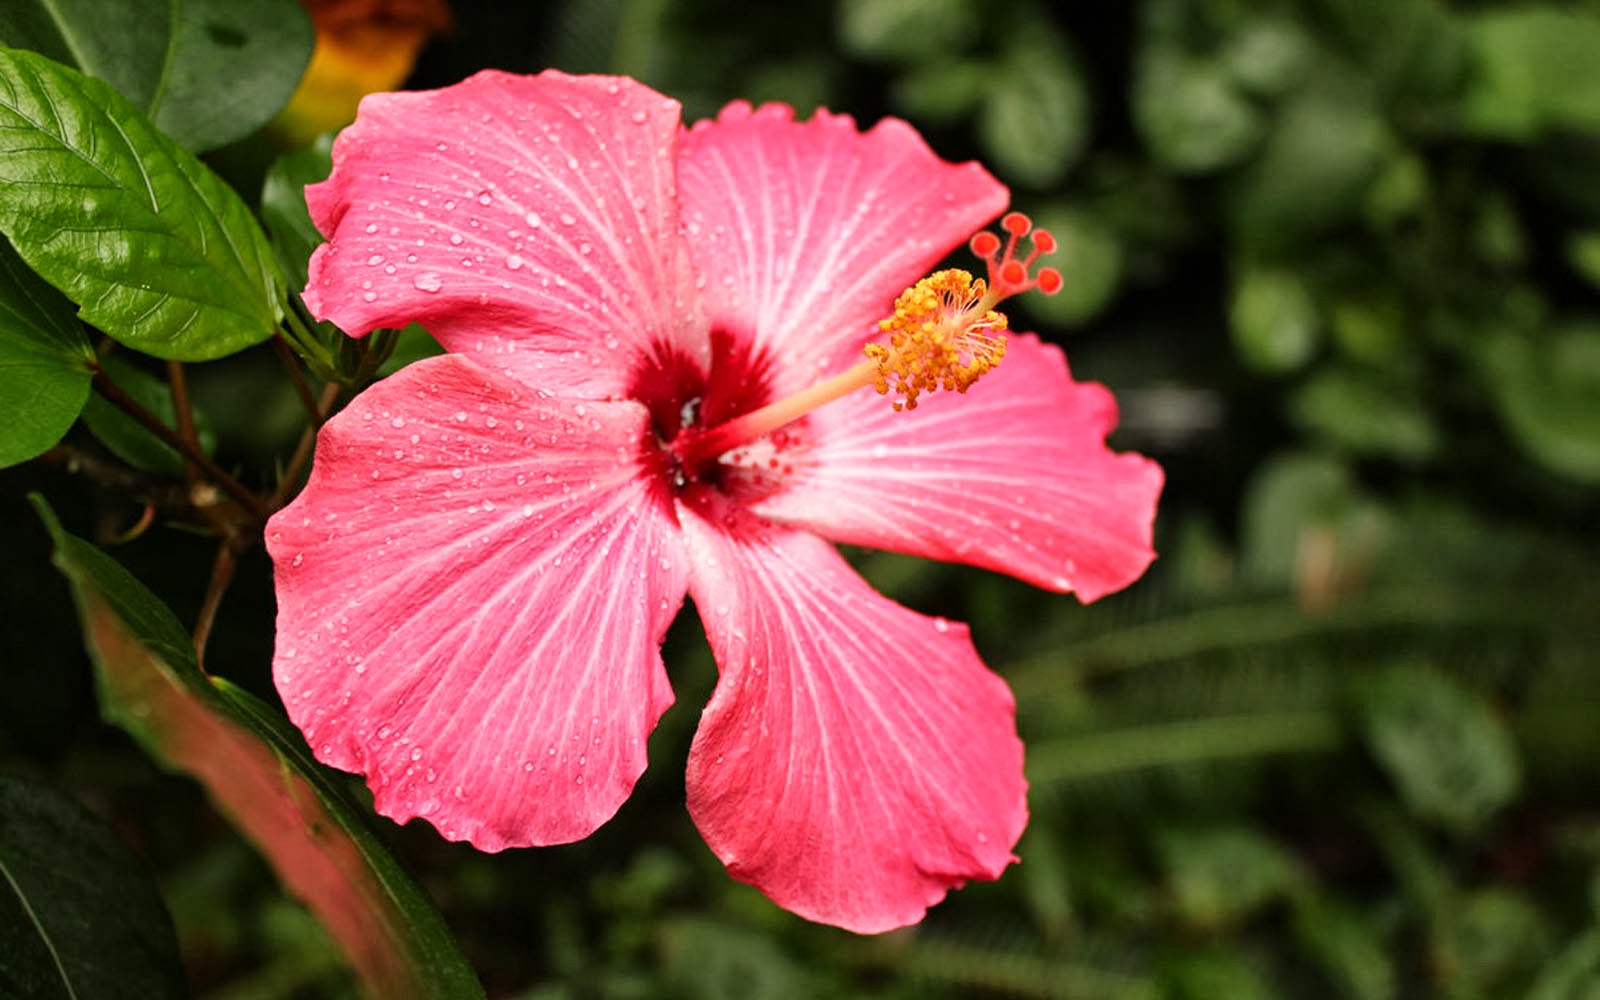 wallpapers: Pink Flowers Wallpapers